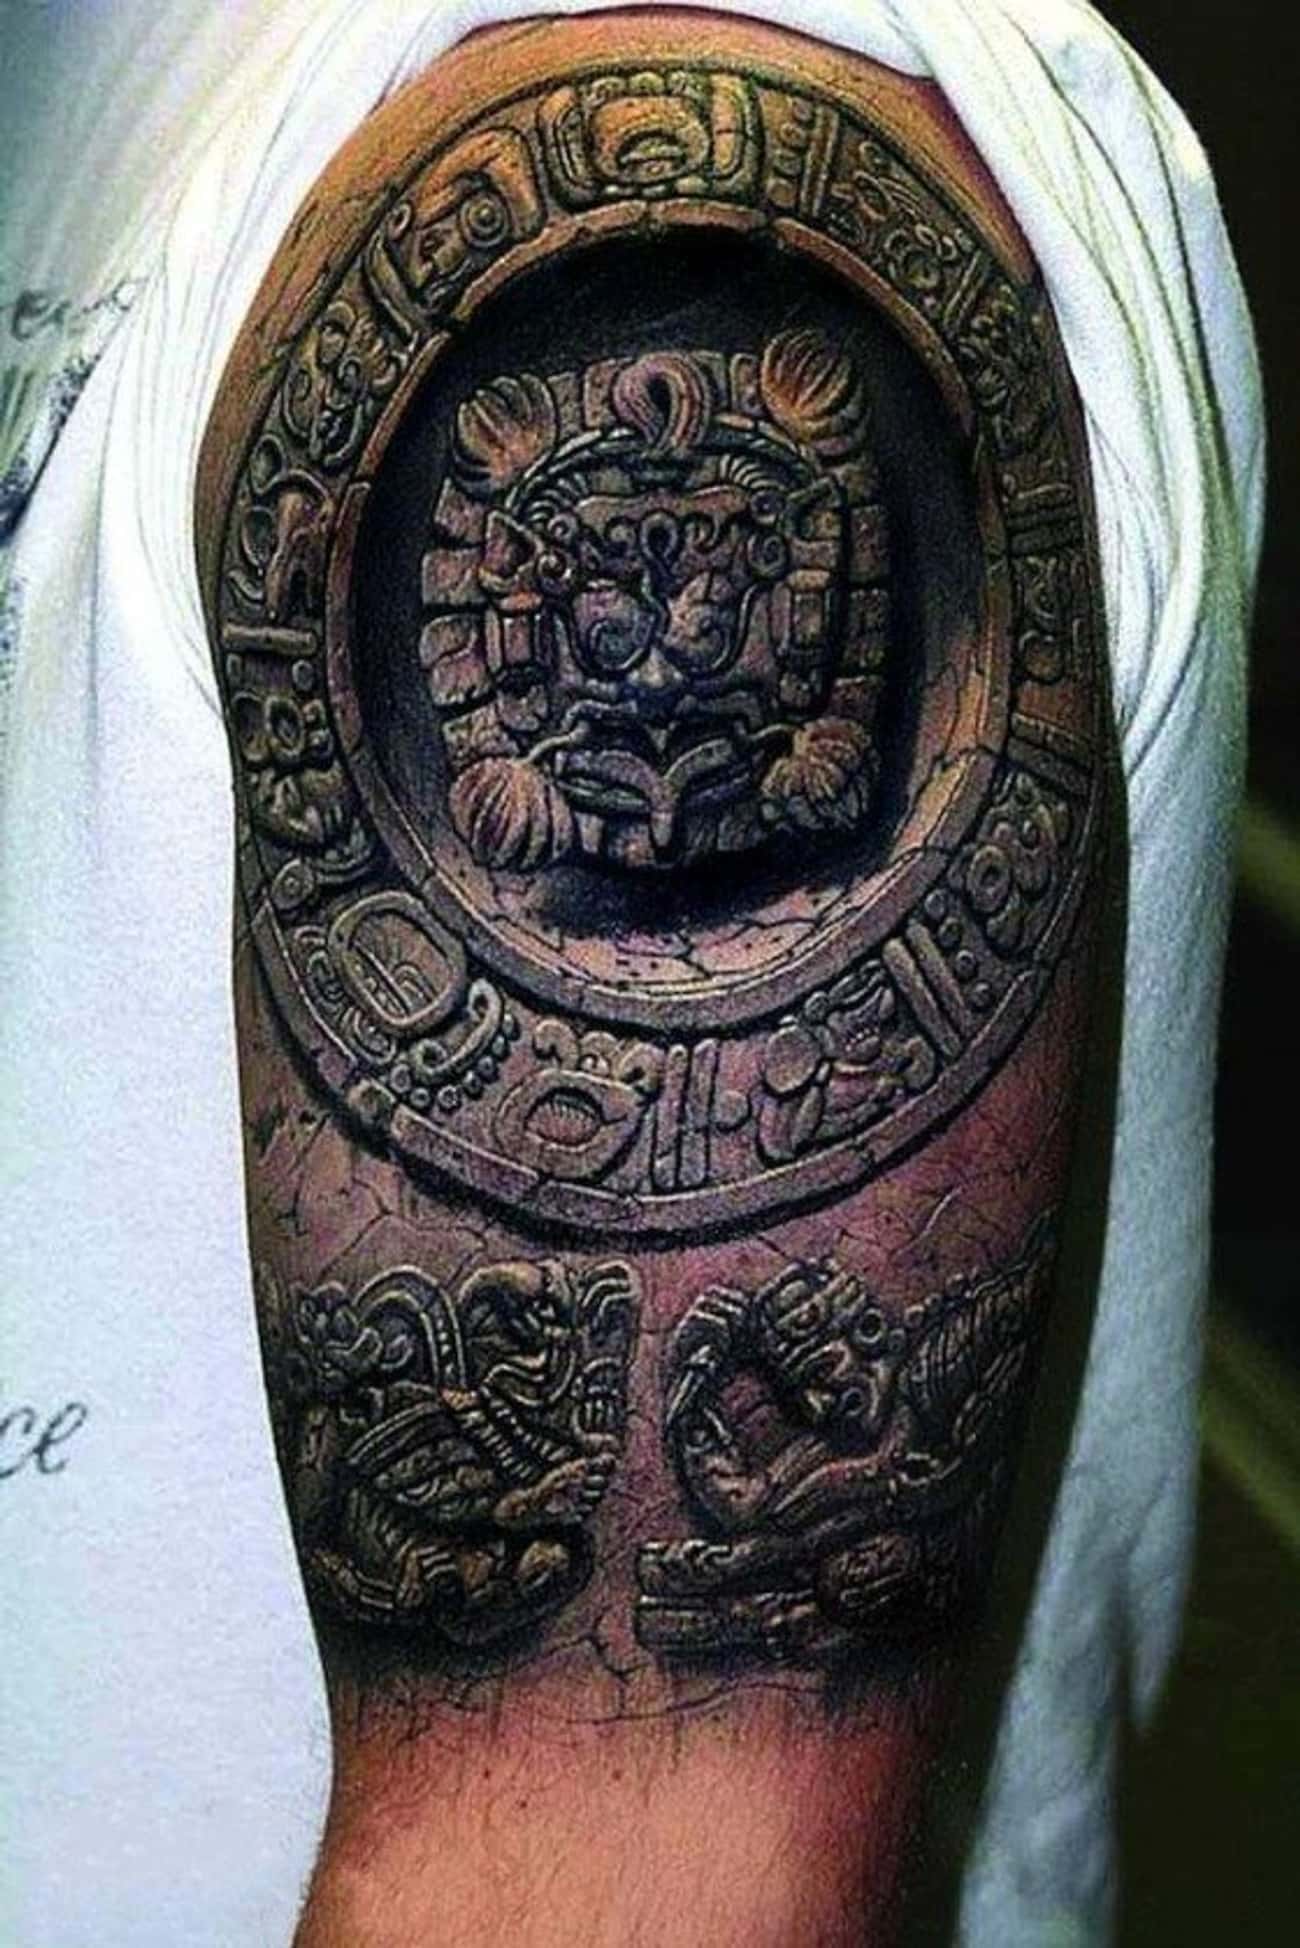 This Intricate Homage to the Mayan Empire